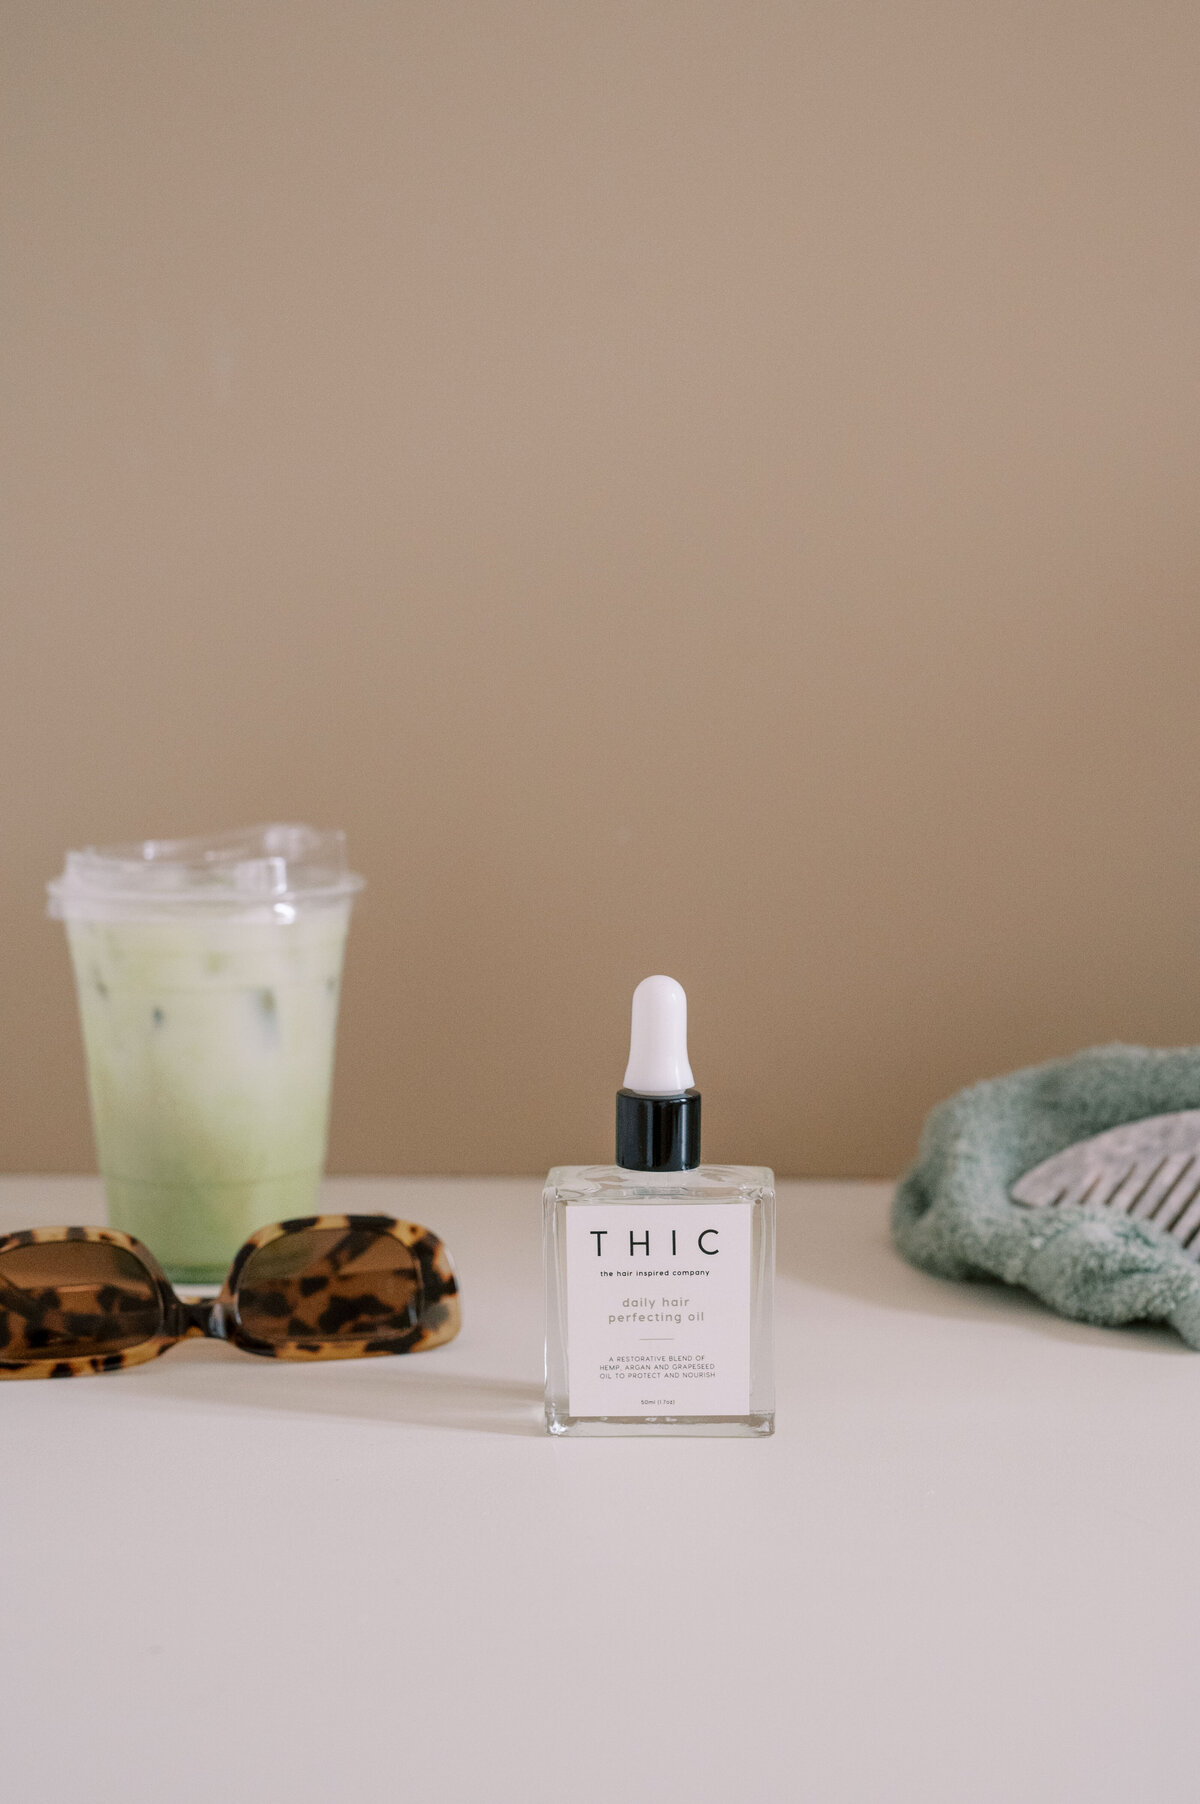 THIC hair products with latte and sunglasses